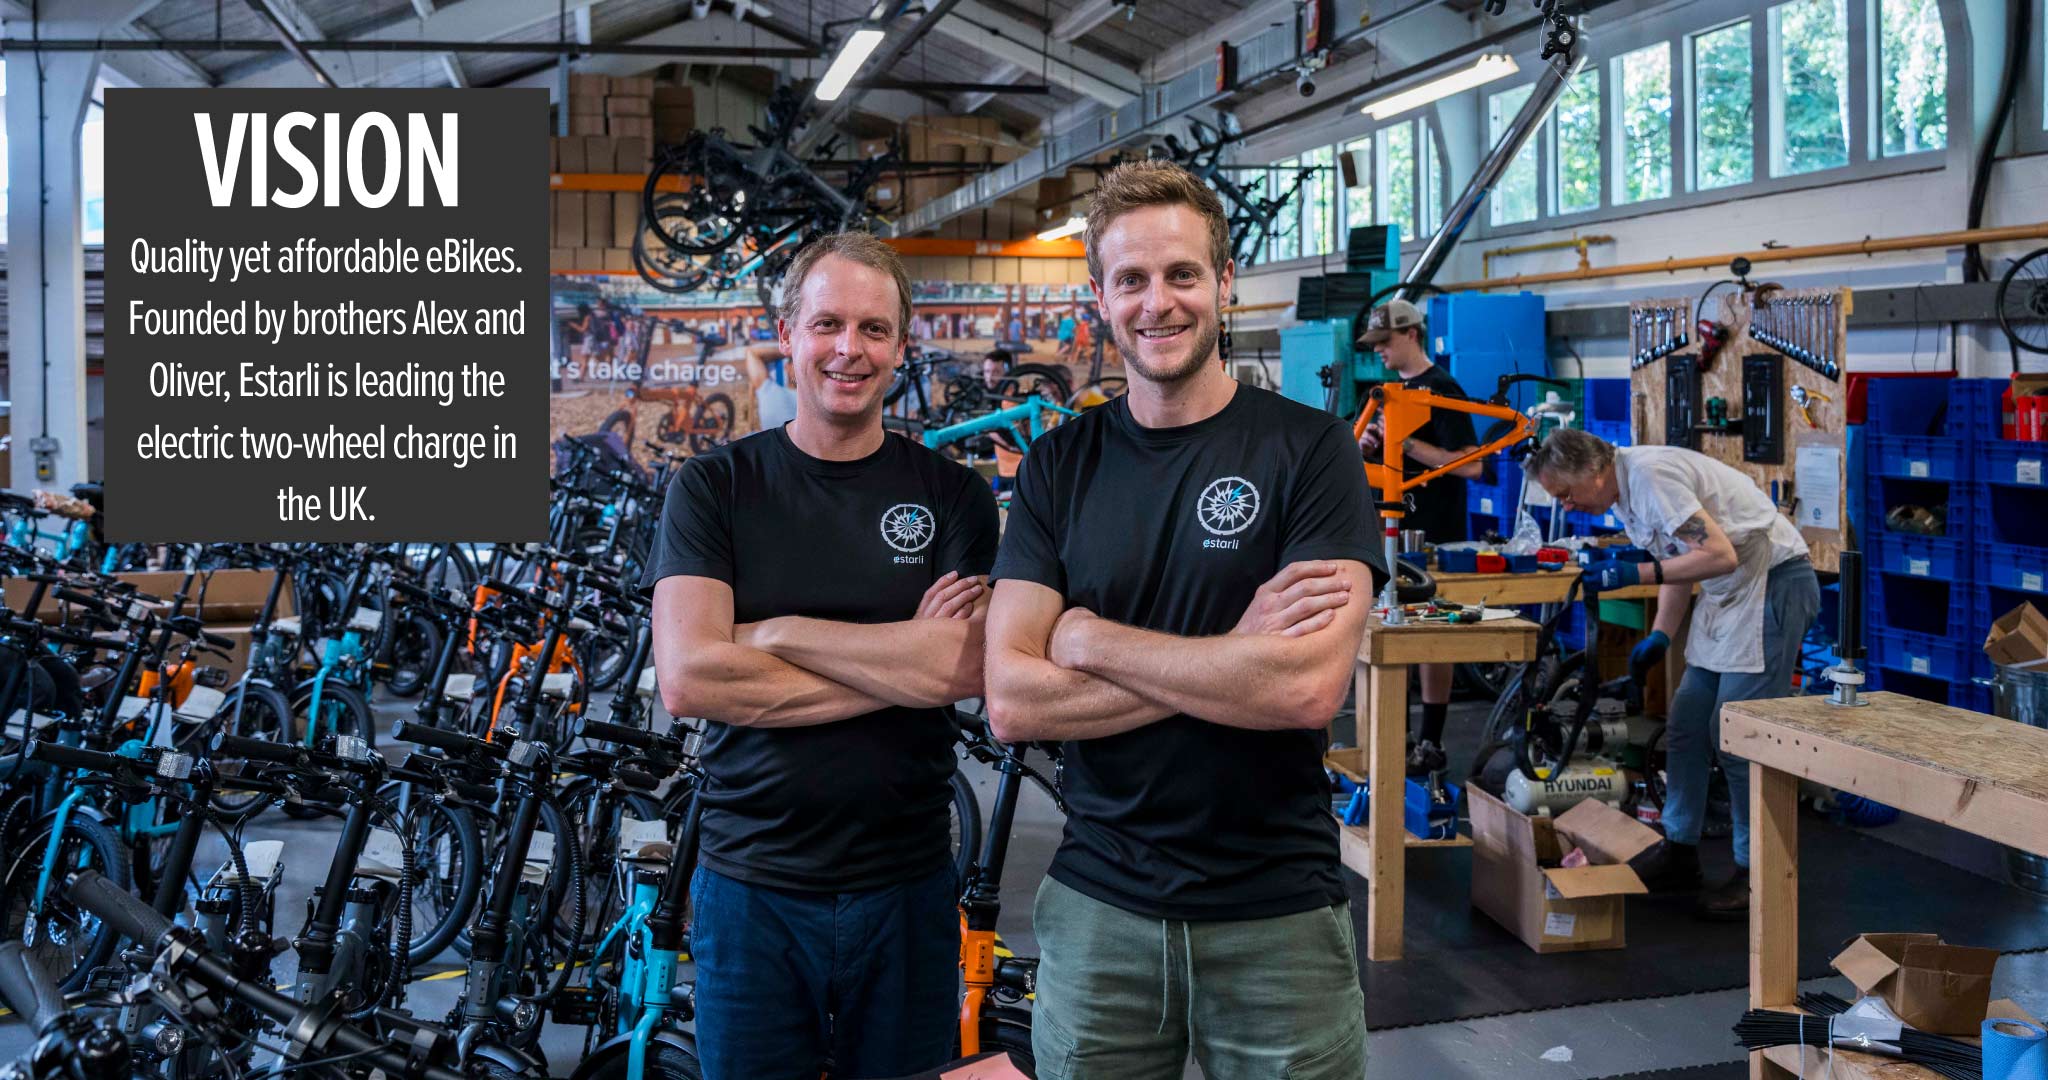 Quality yet affordable eBikes. Founded by brothers Alex and Oliver, Estarli is leading the electric two-wheel charge in the UK.